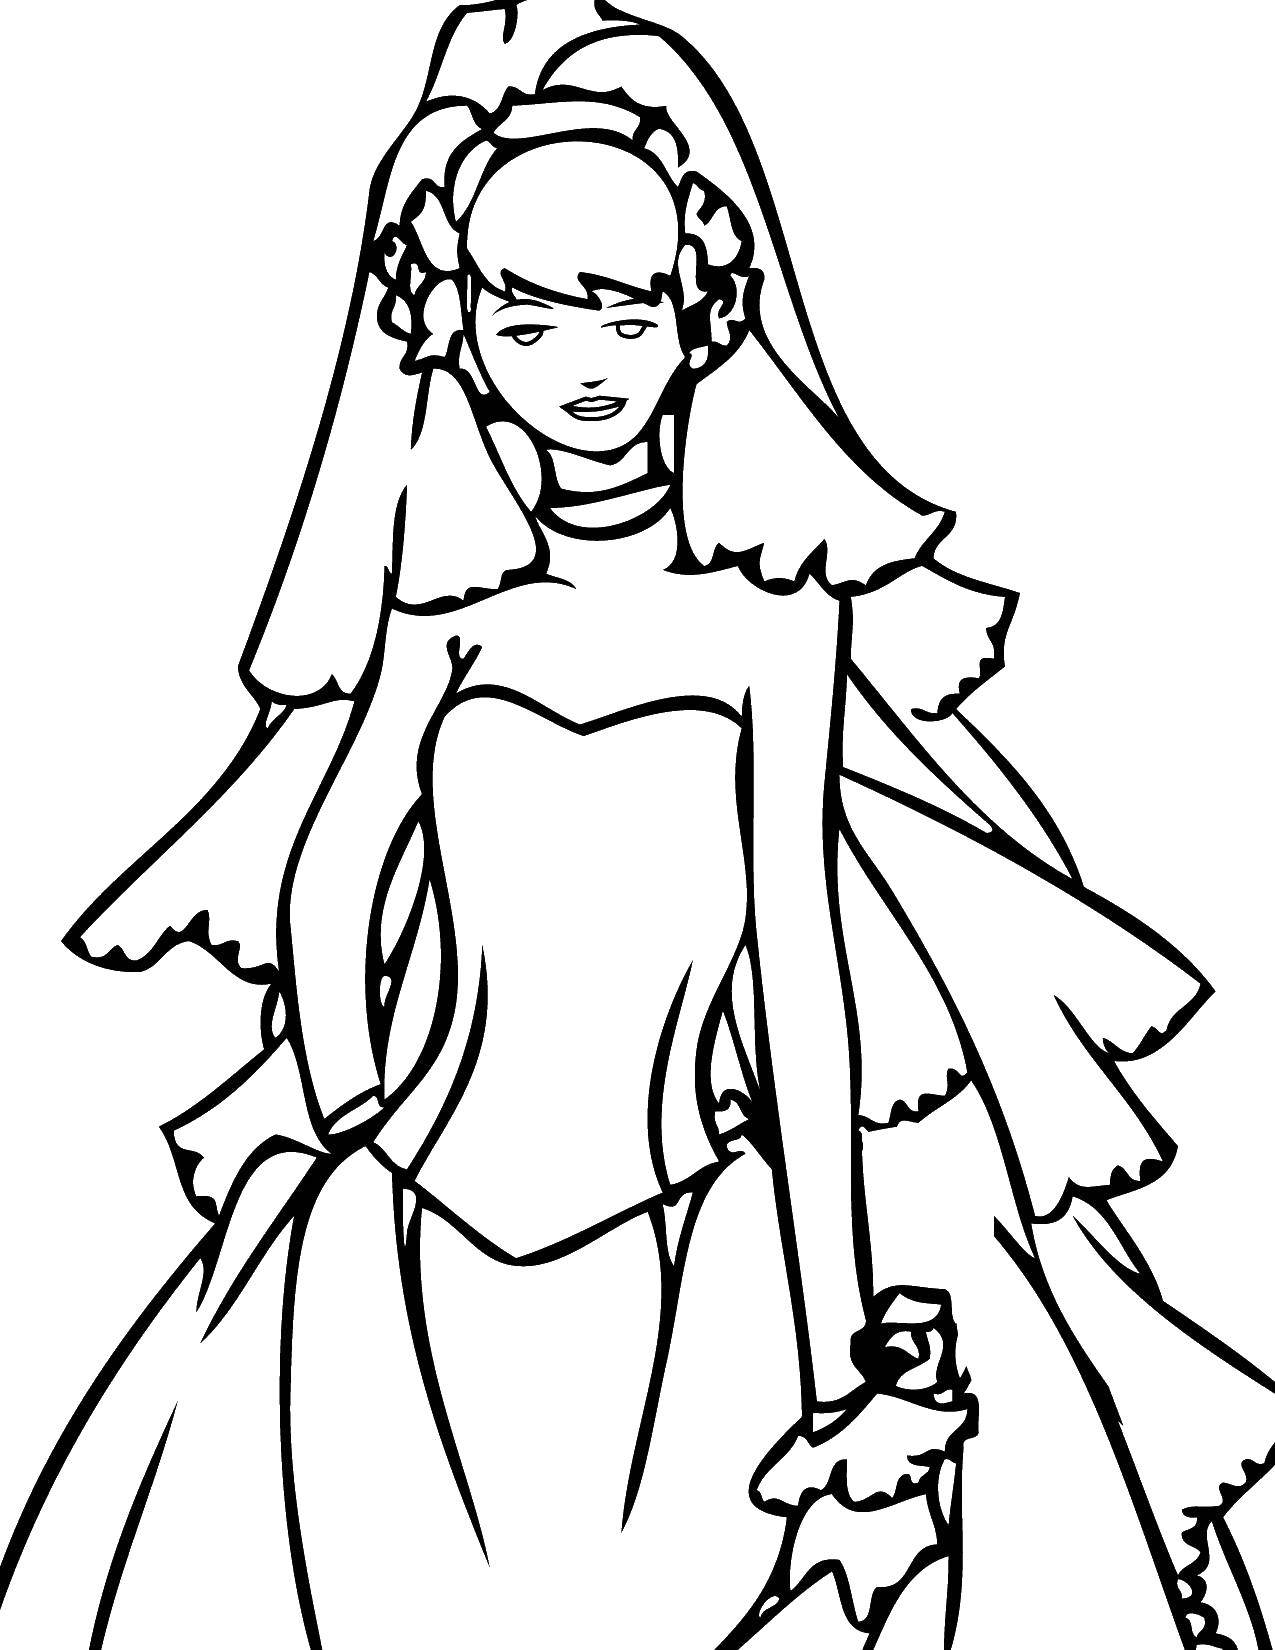 Coloring Bride in dress. Category Wedding. Tags:  the bride, dress, veil, bouquet.